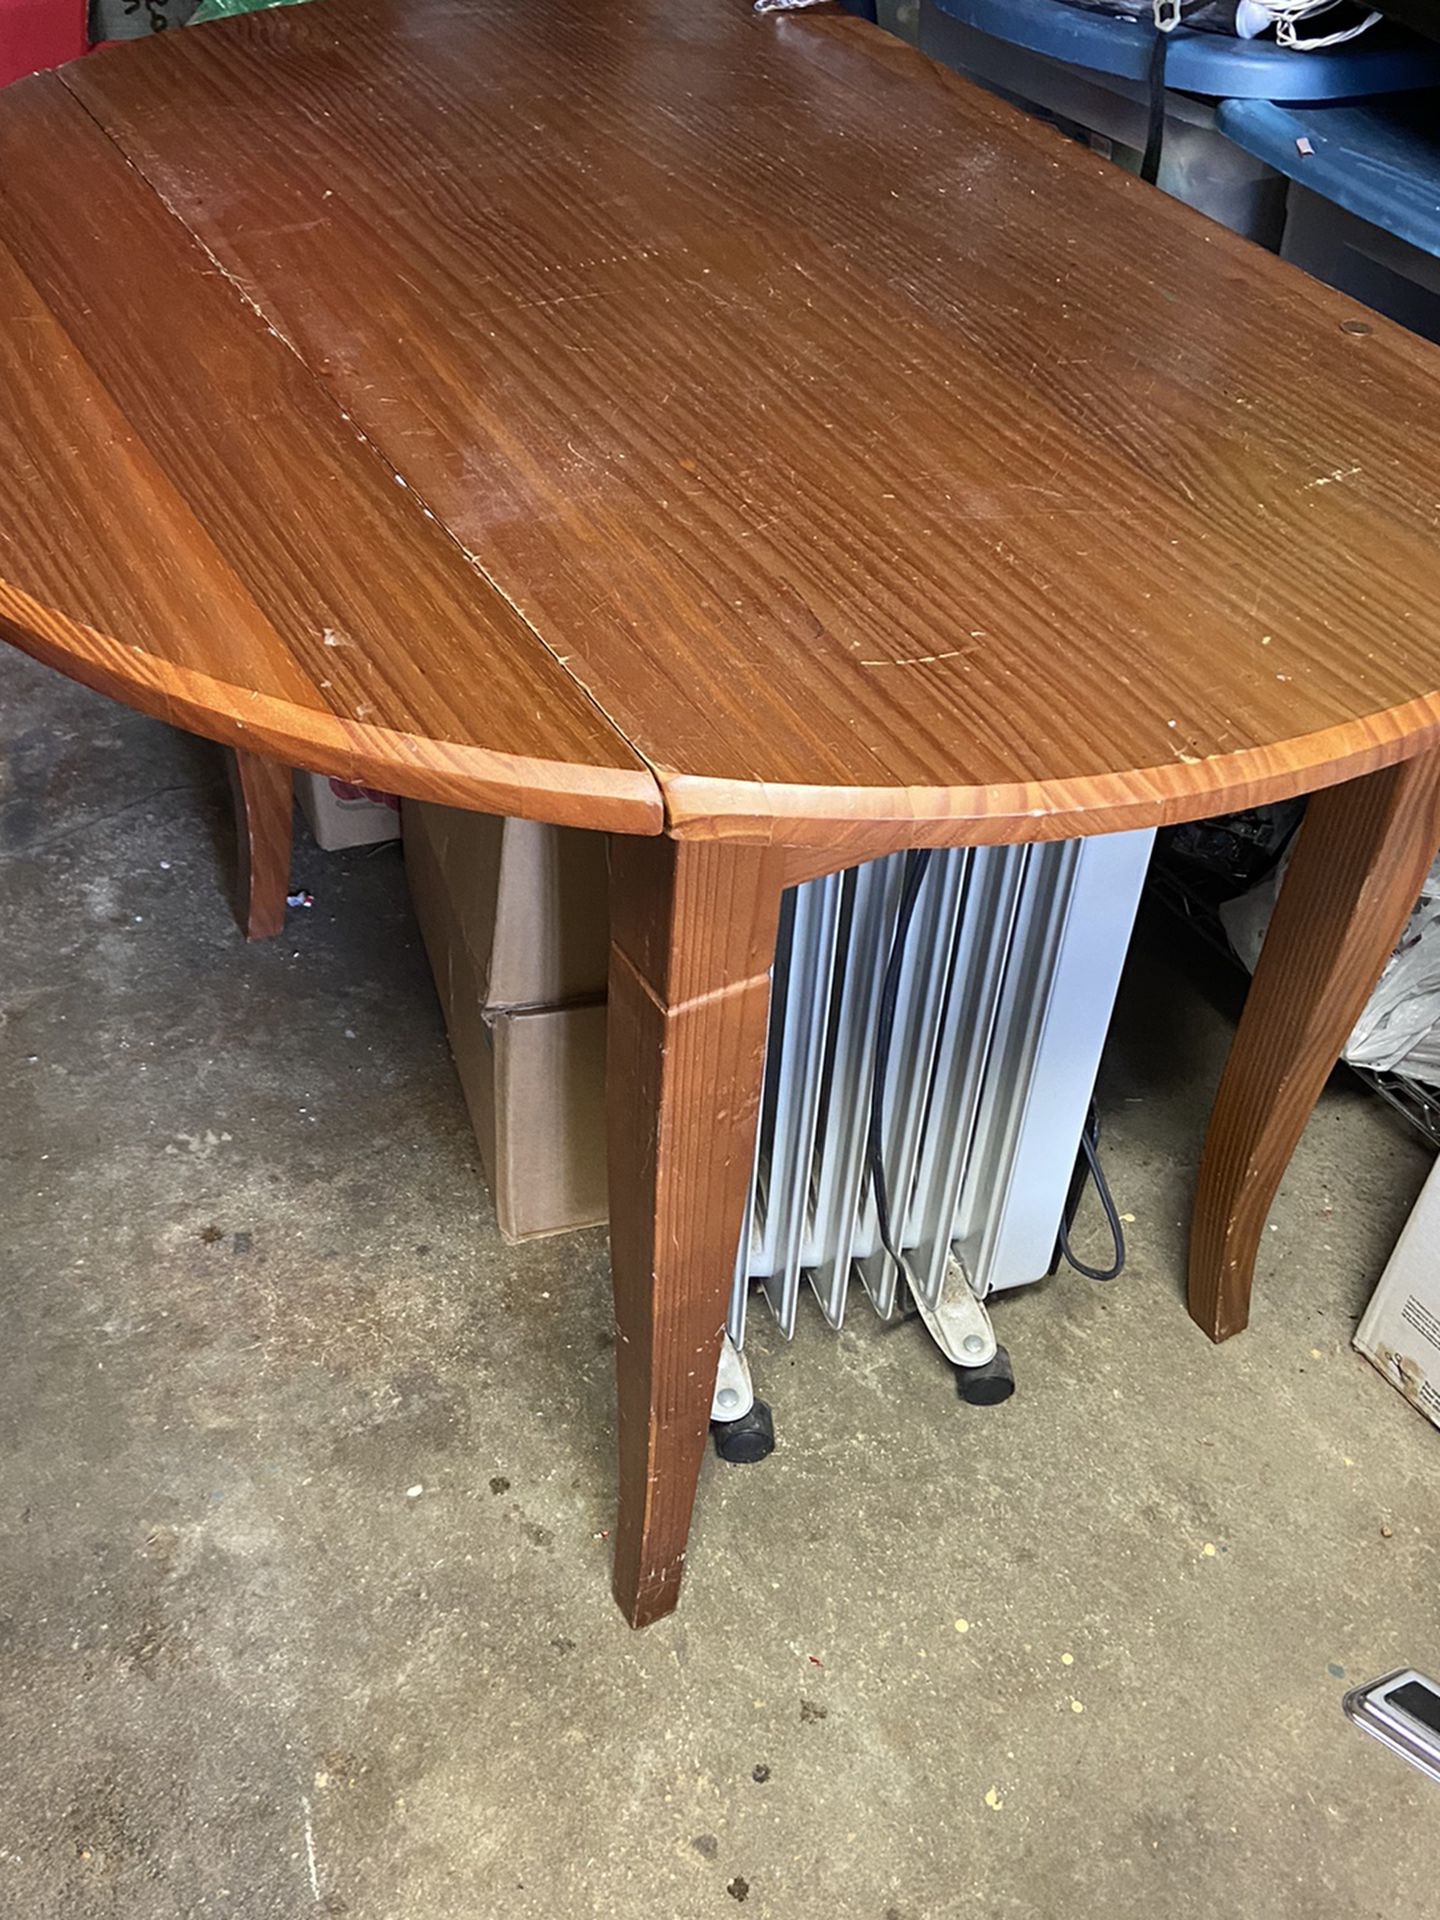 Pier One leaf table and four chairs